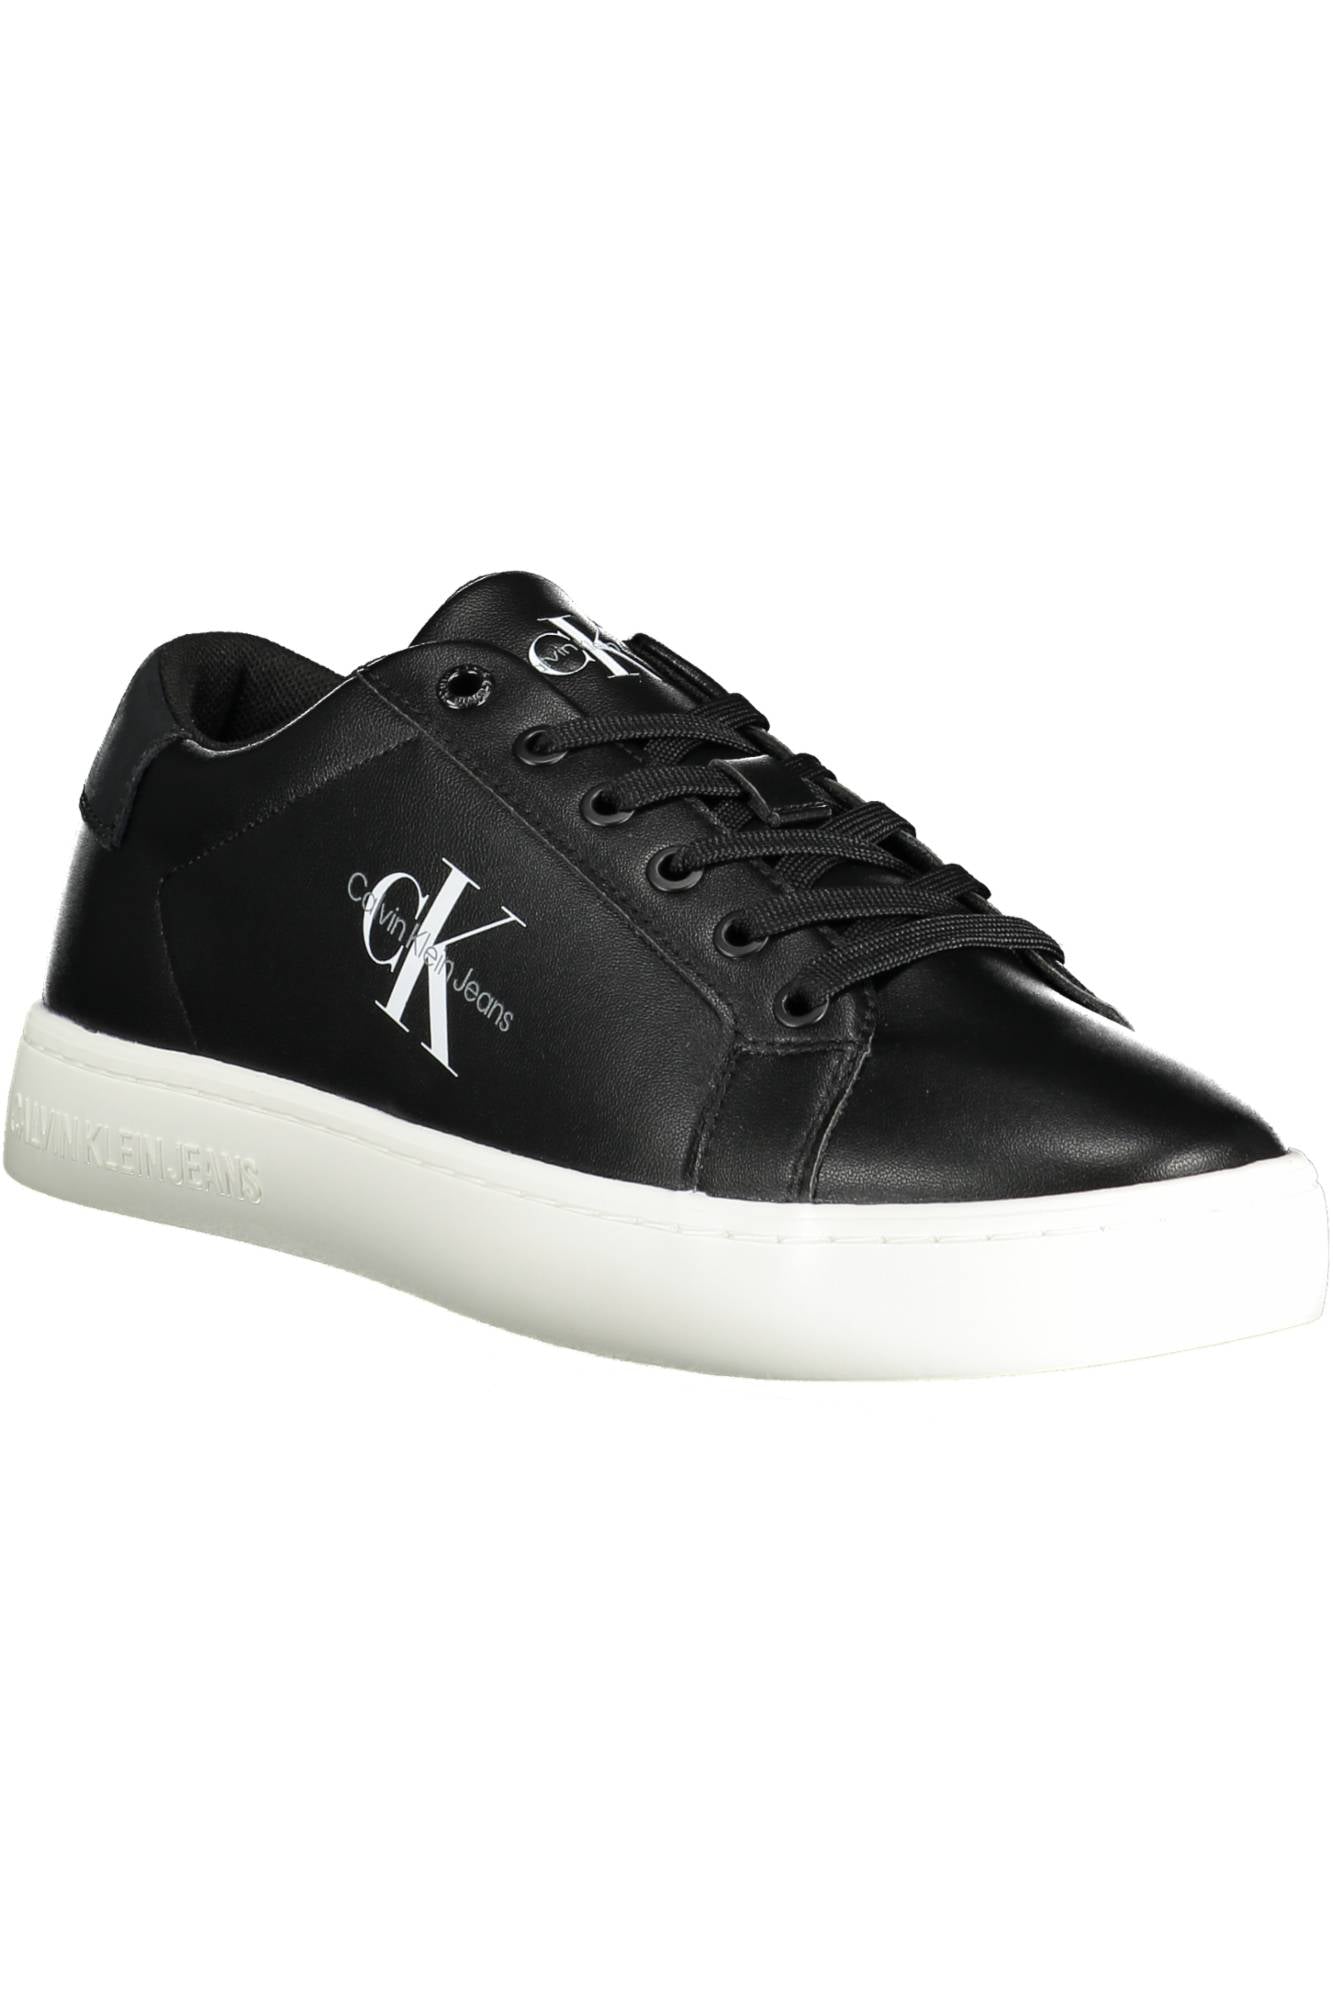 Calvin Klein Black Men'S Sports Shoes - BRAND NEW FROM ITALY